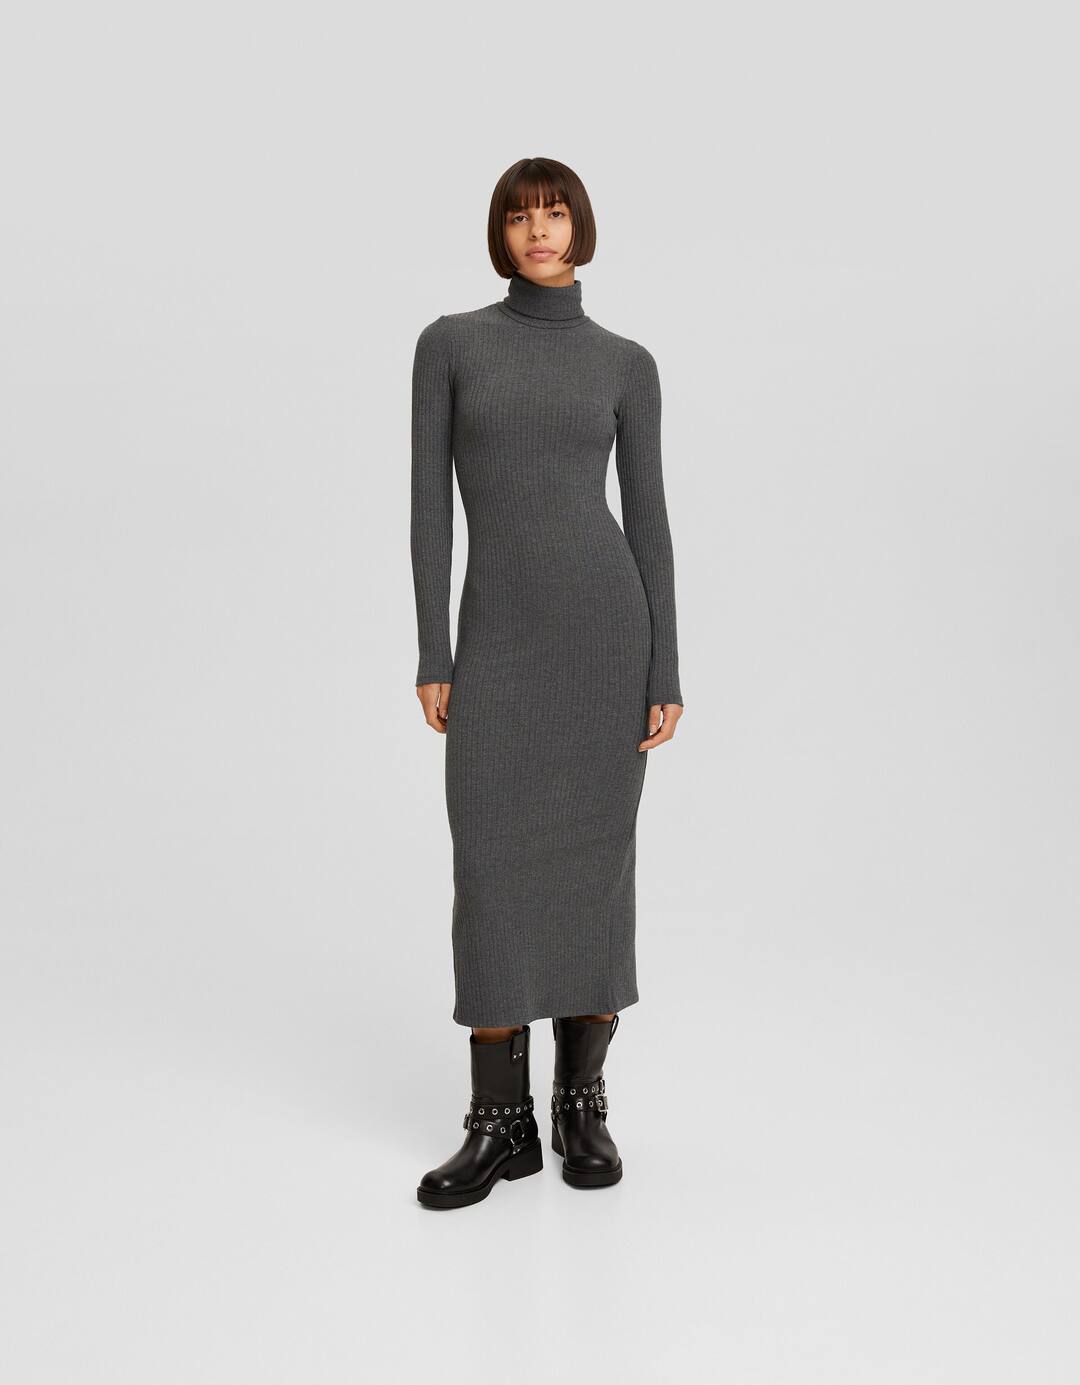 Ribbed knit high neck dress with long sleeves